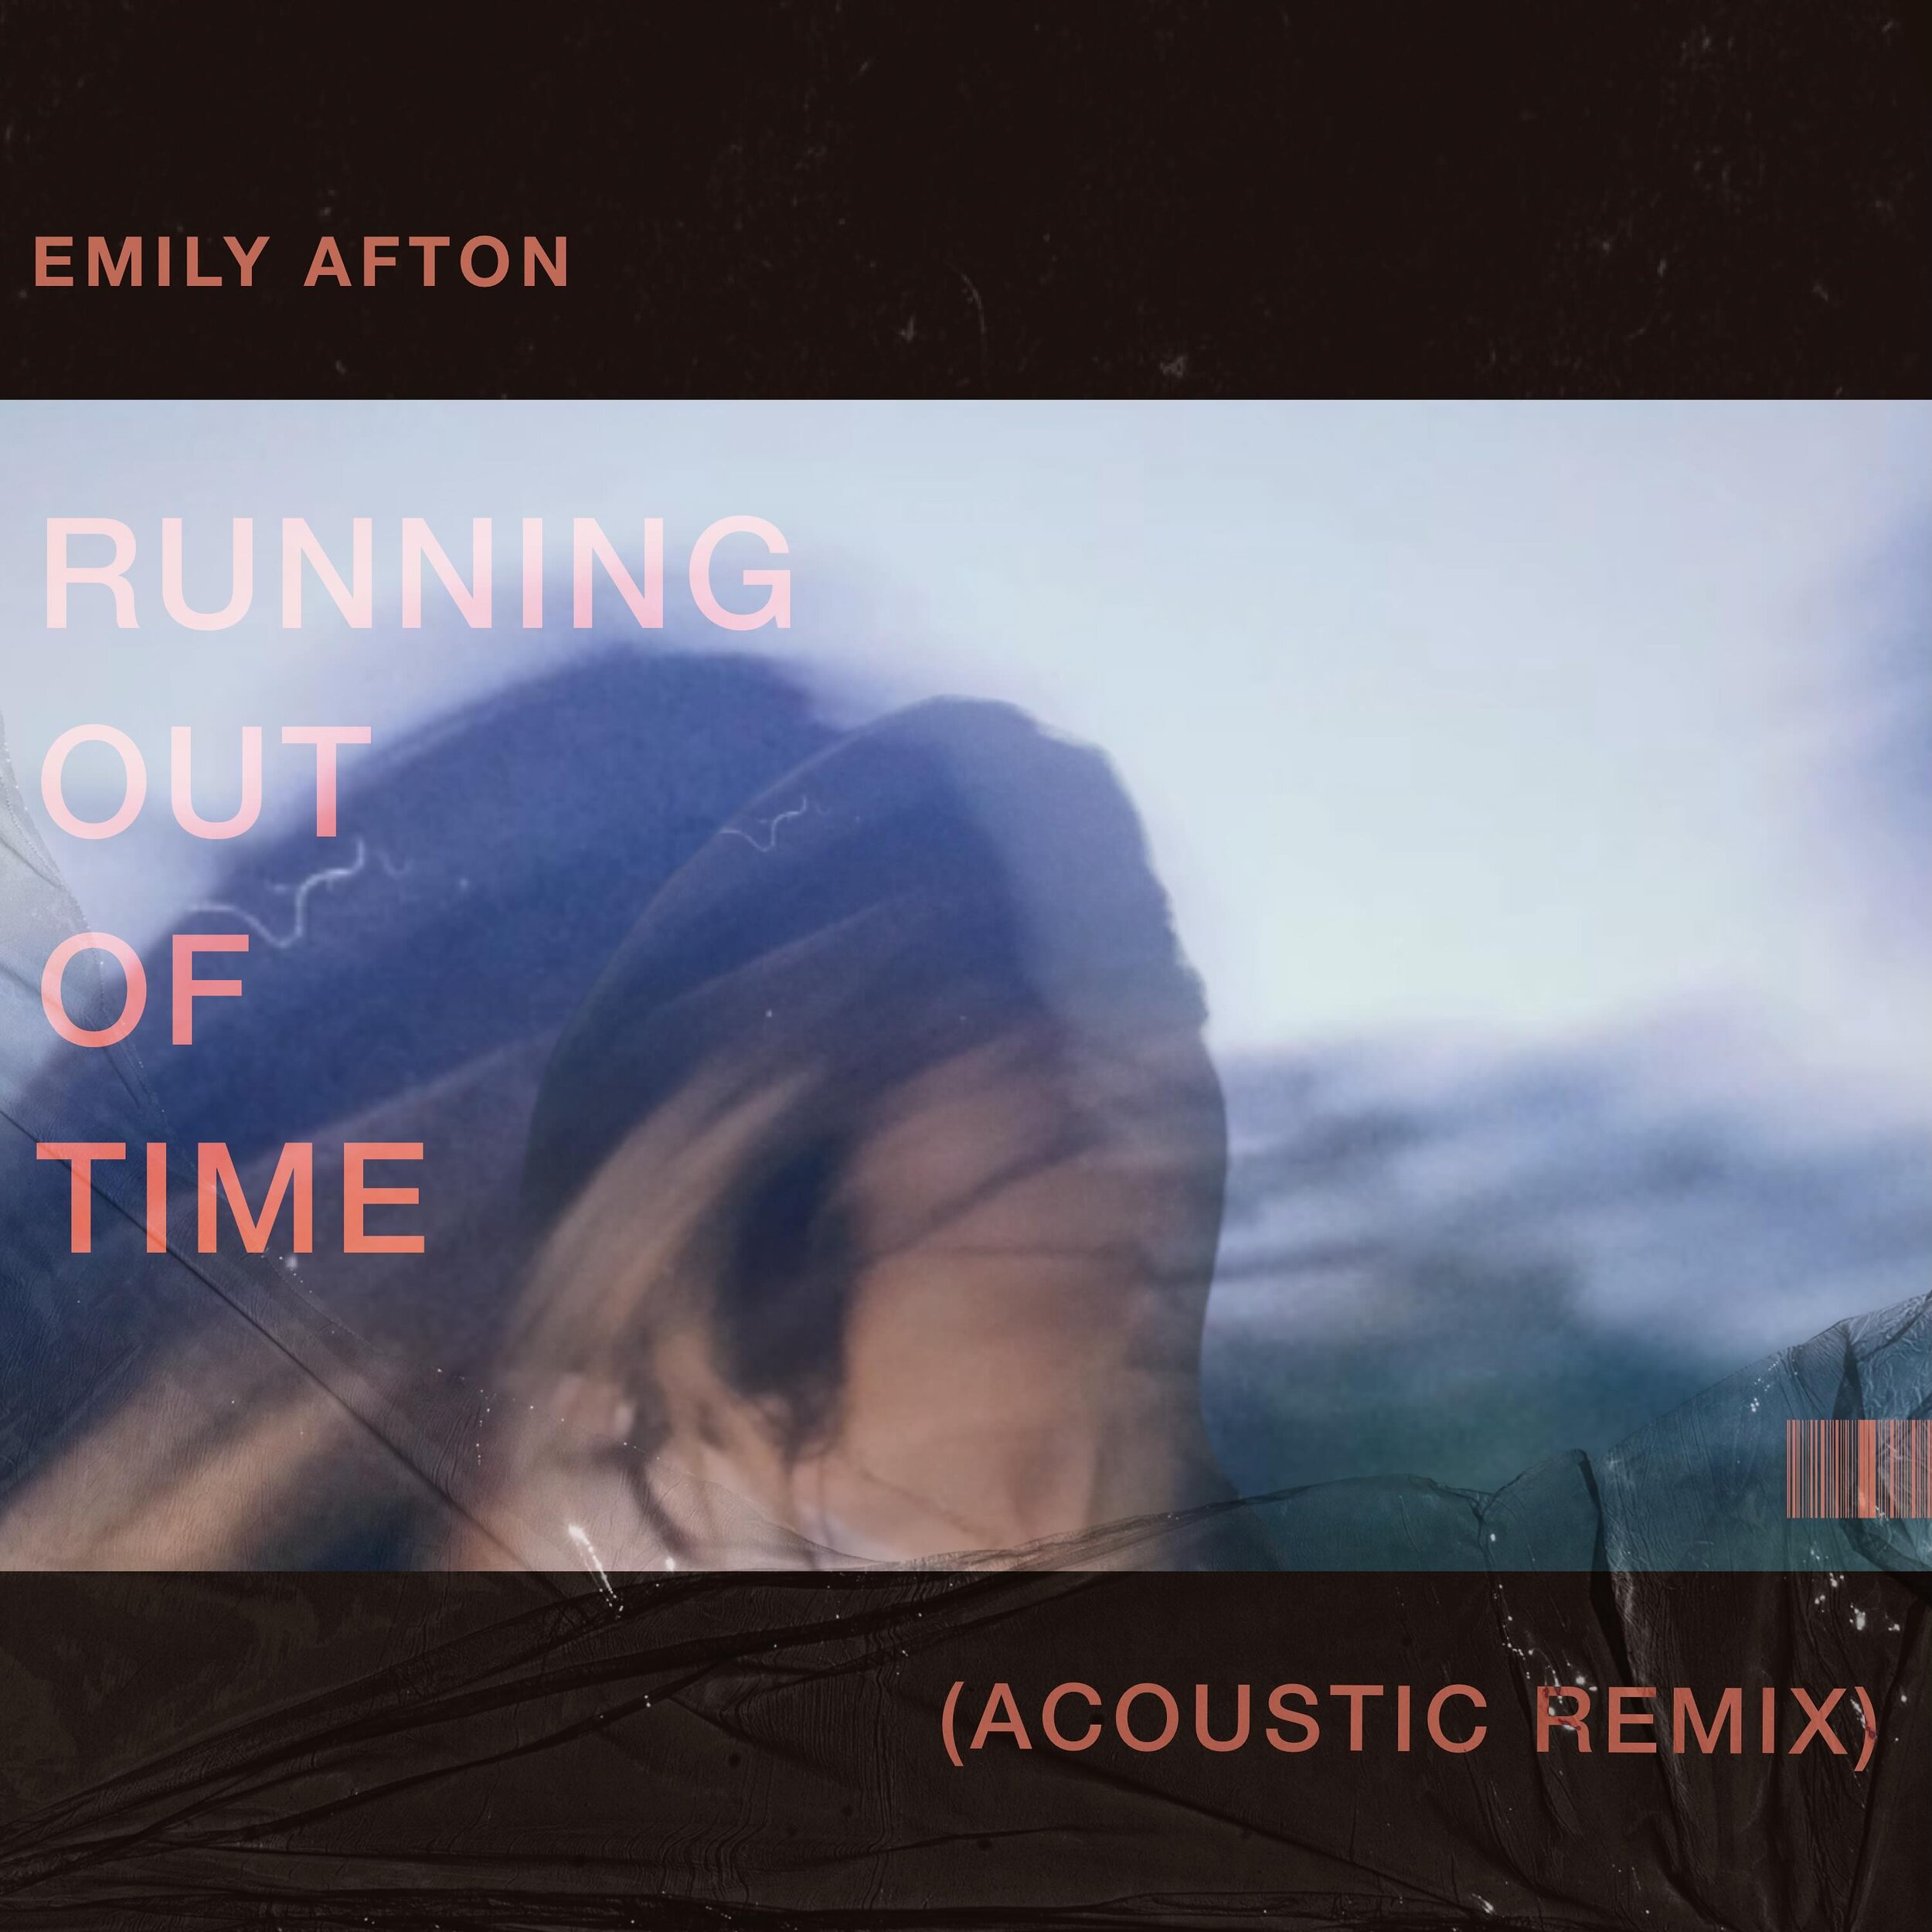 Today Running out of Time (Acoustic Remix) is out on all streaming platforms! ⏳

On the one hand, it is just a song, and just another release, but if I allow myself to reflect a little I will say that it feels like the accumulation of a lot more. Thi